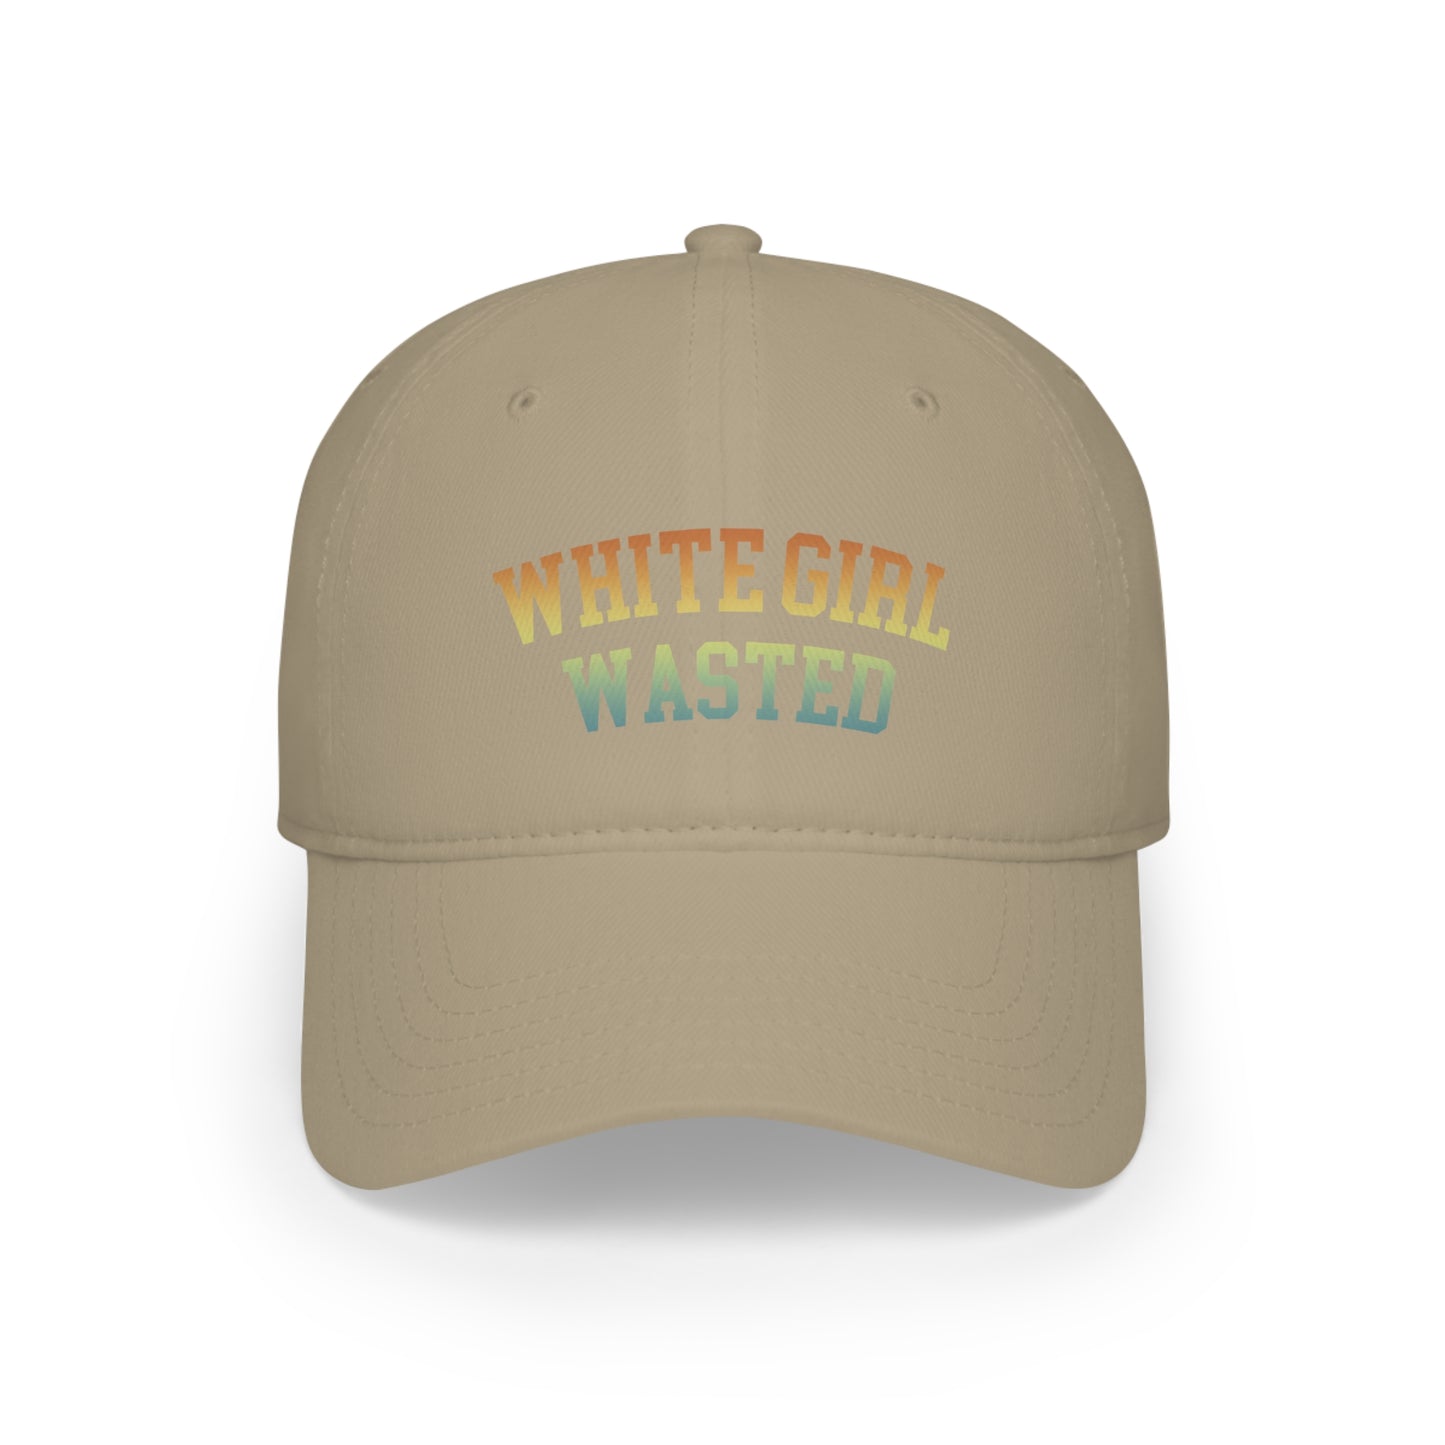 "White Girl Wasted" Drinking Hat